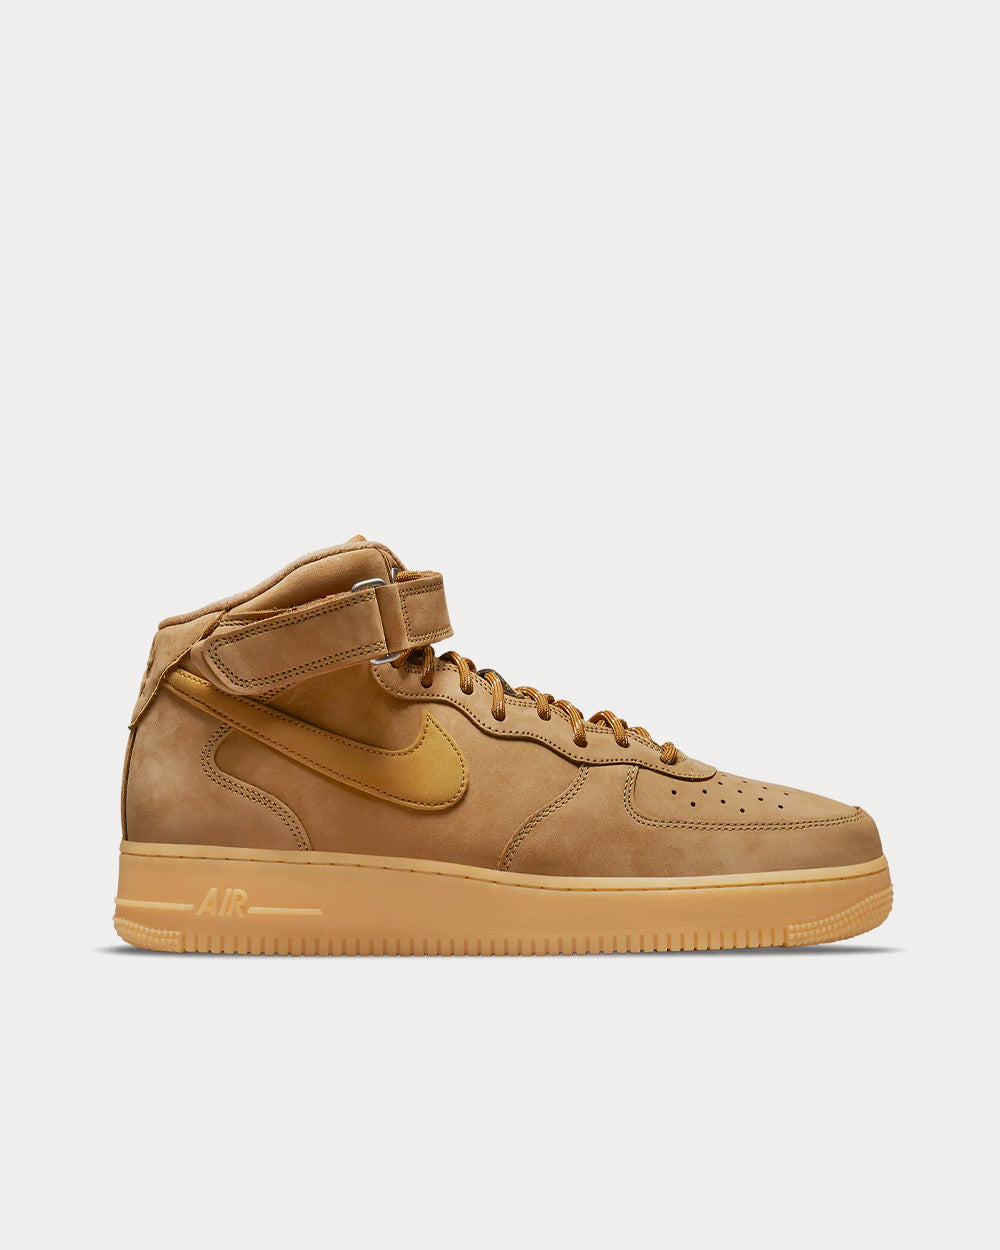 Nike Air Force 1 Mid '07 Flax / Gum Light Brown / / Wheat High Top Sneakers - Sneak in Peace